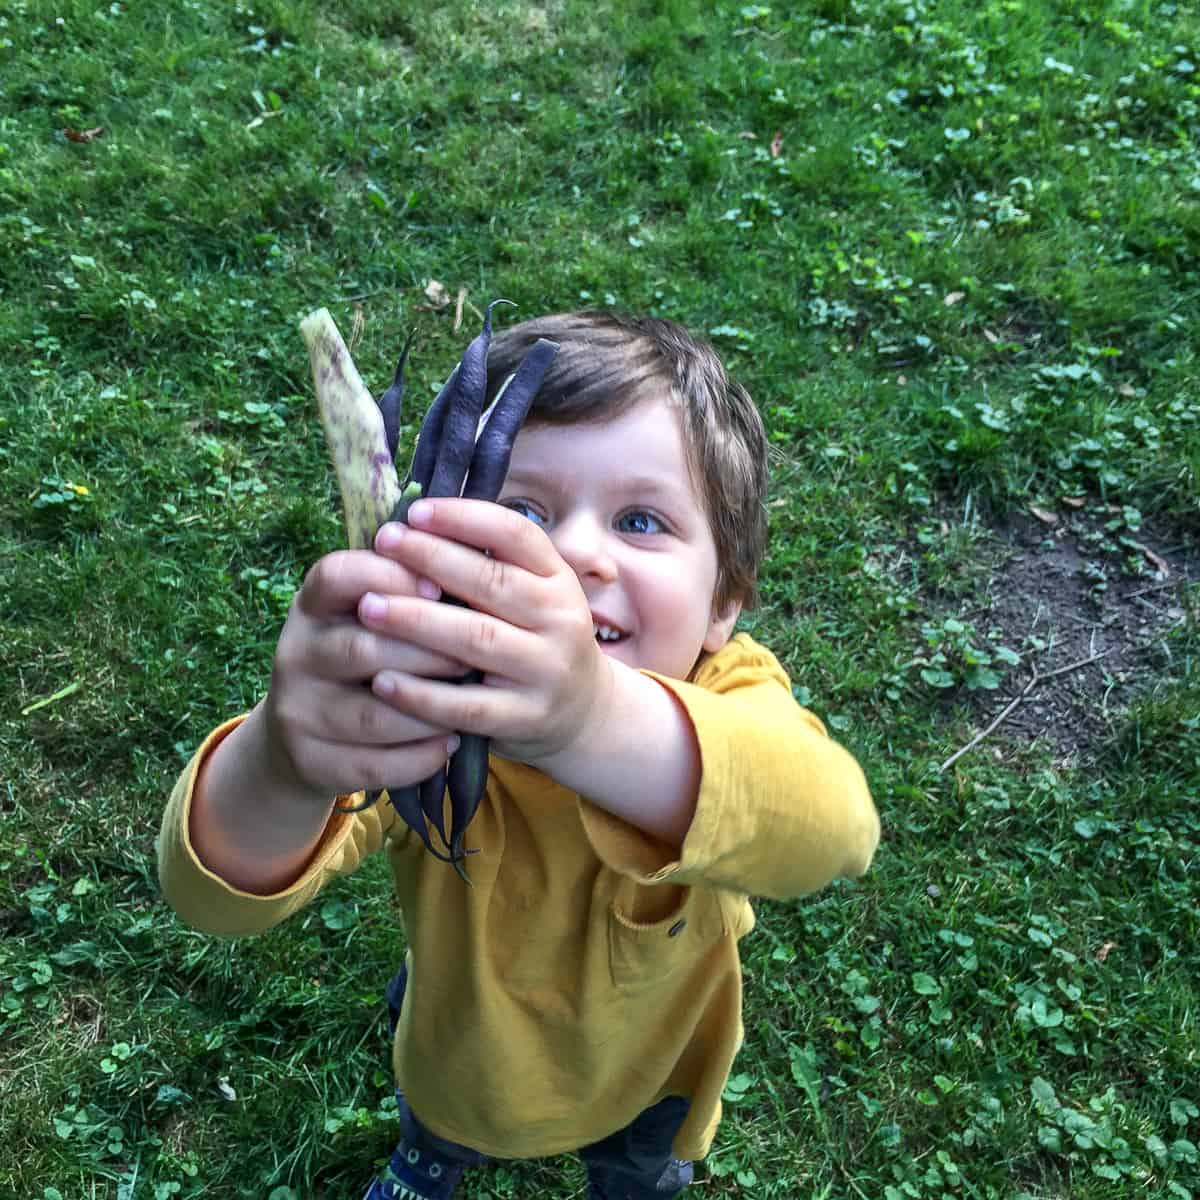 A small child joyfully holding up a bunch of purple and yellow beans.